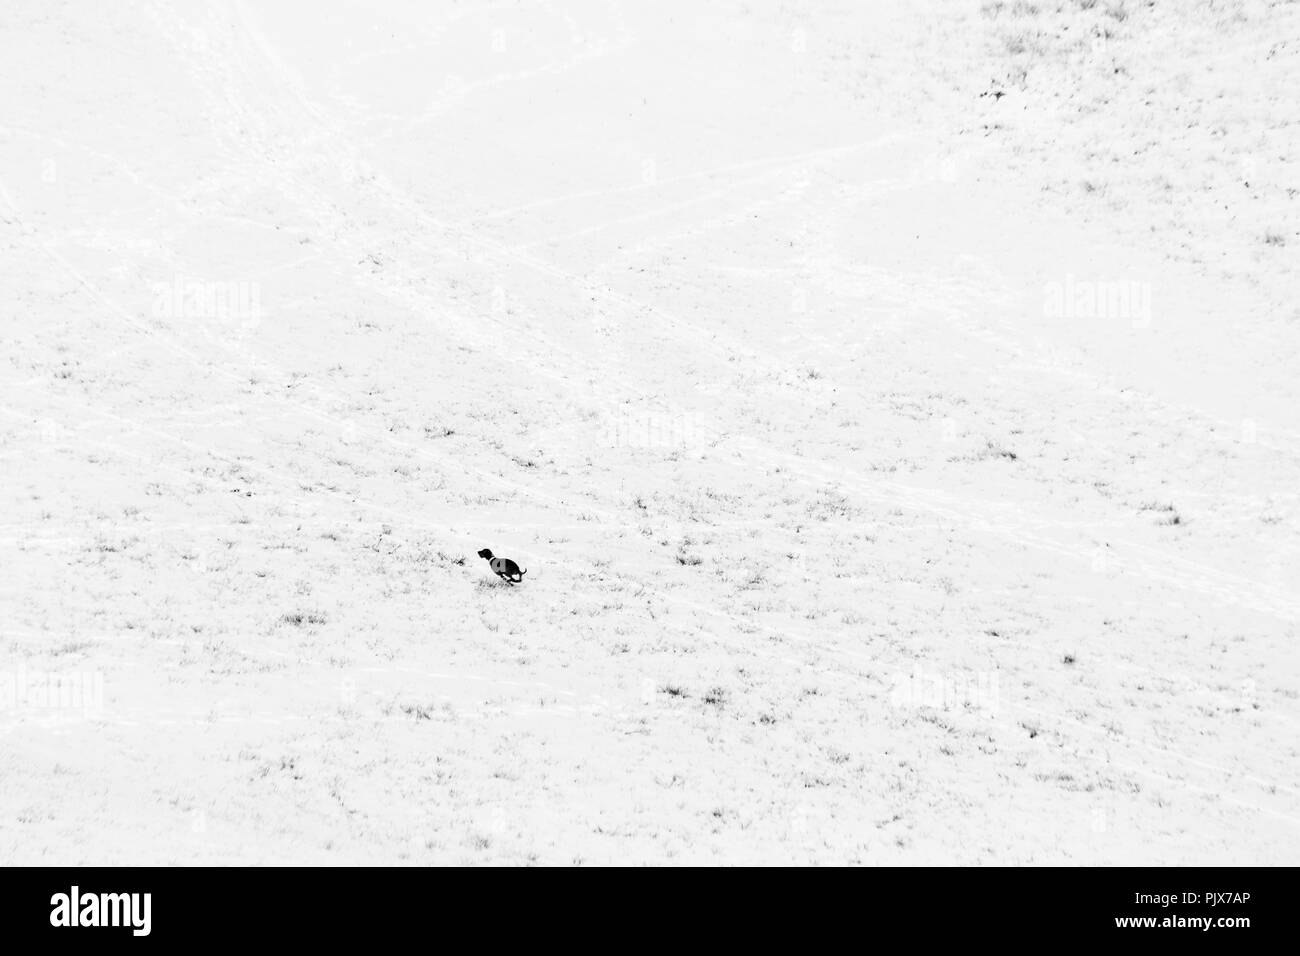 A dog running over a mountain field covered by snow Stock Photo